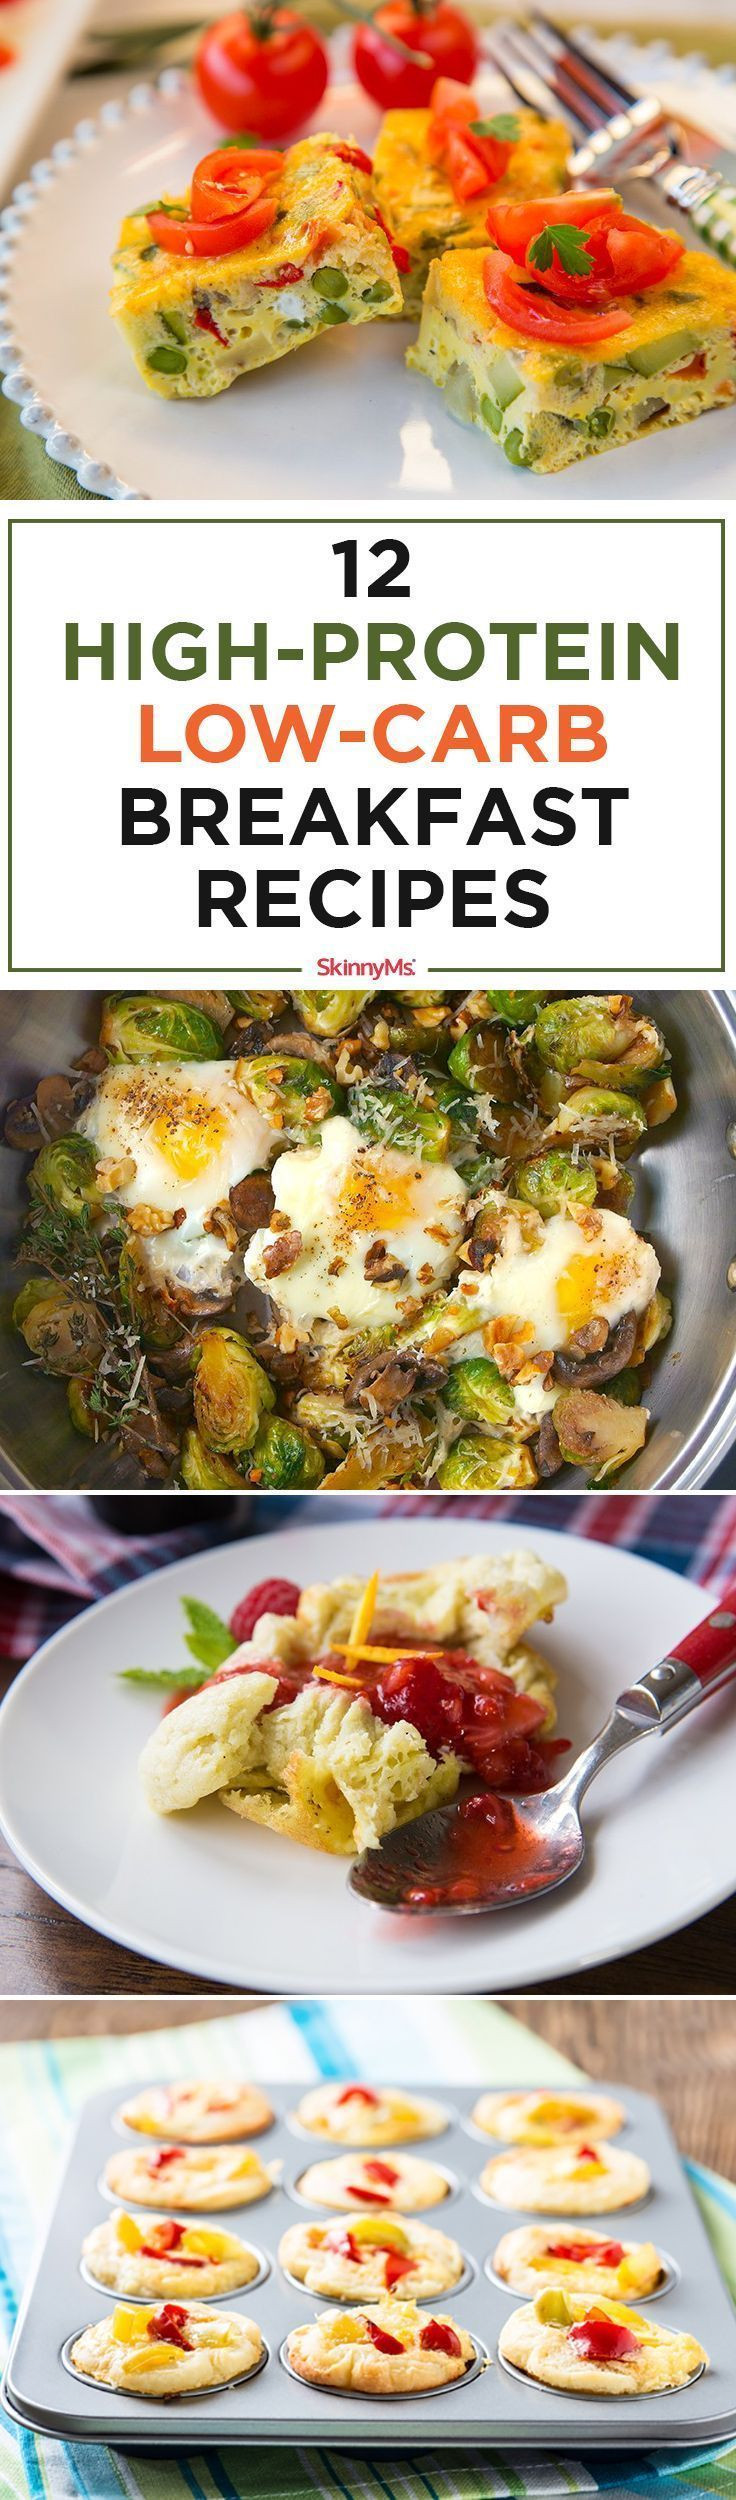 Healthy Low Carb High Protein Recipes
 29 best images about Healthy snacks on Pinterest